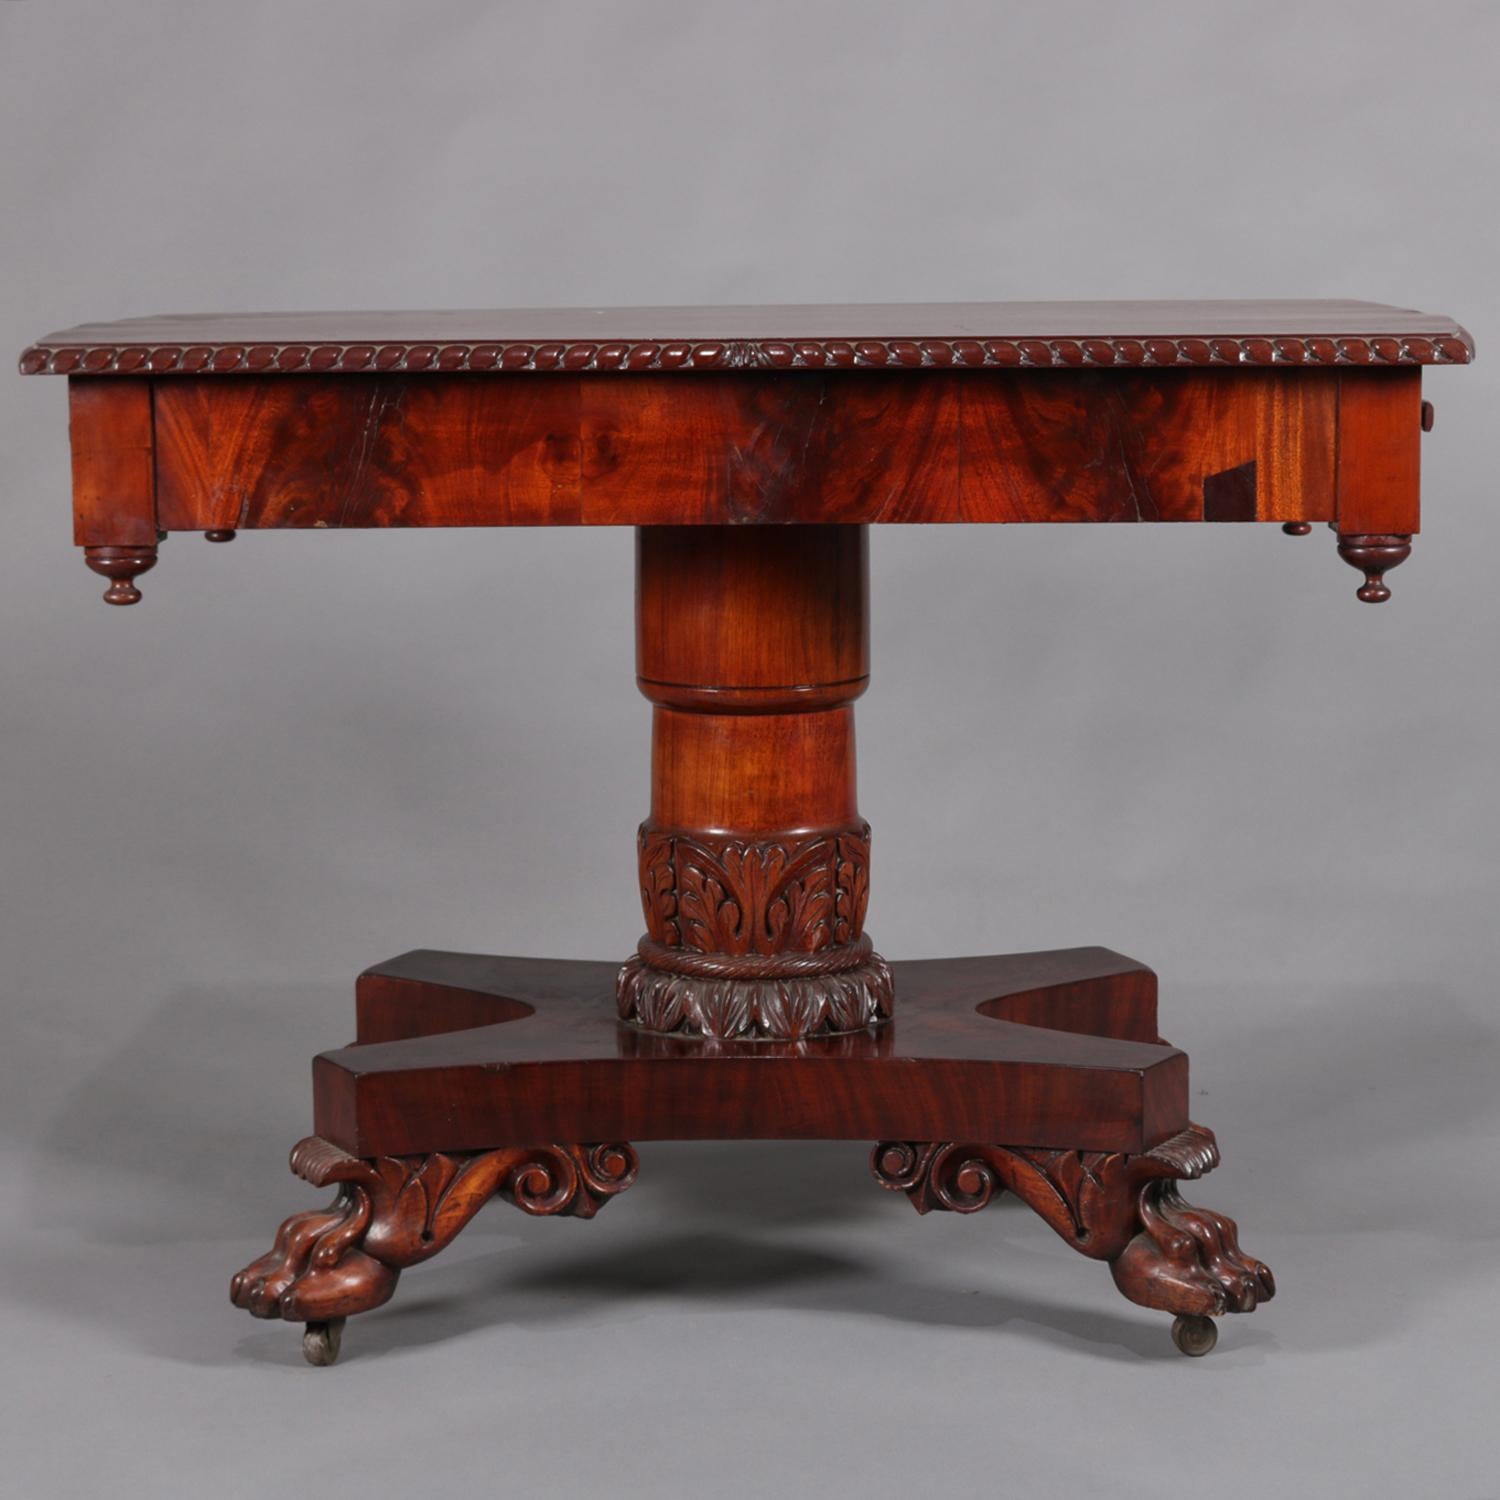 Antique American Empire console table features flame mahogany construction with top bordered in carved rope twist over case with two drawers and four drop corner finials, pedestal with carved foliate acanthus collar on base raised on carved paw feet